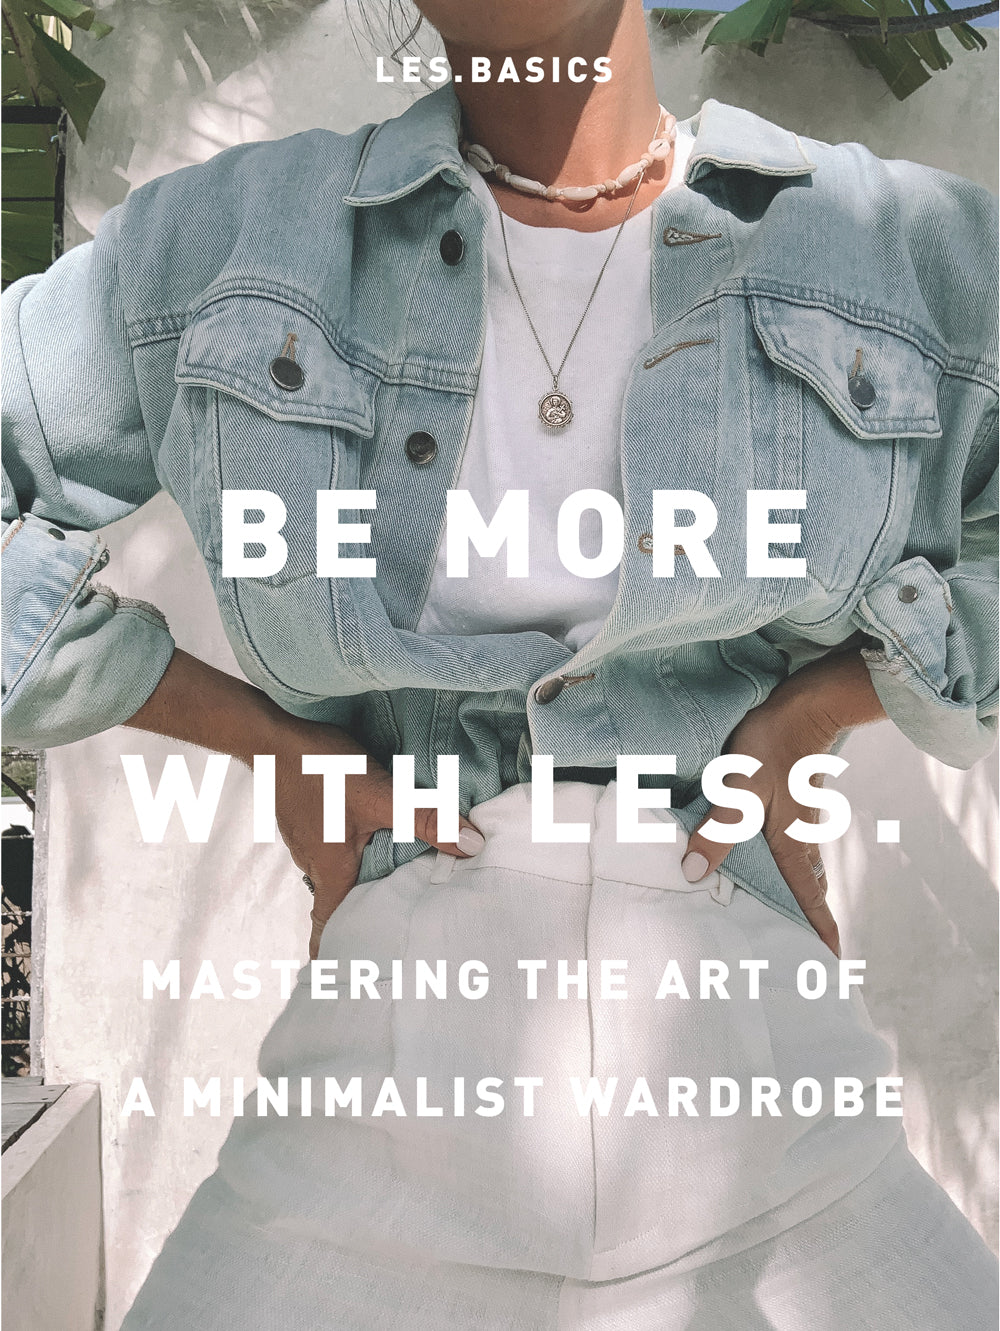 Be more with less - Mastering the art of a minimalist wardrobe – Les.Basics